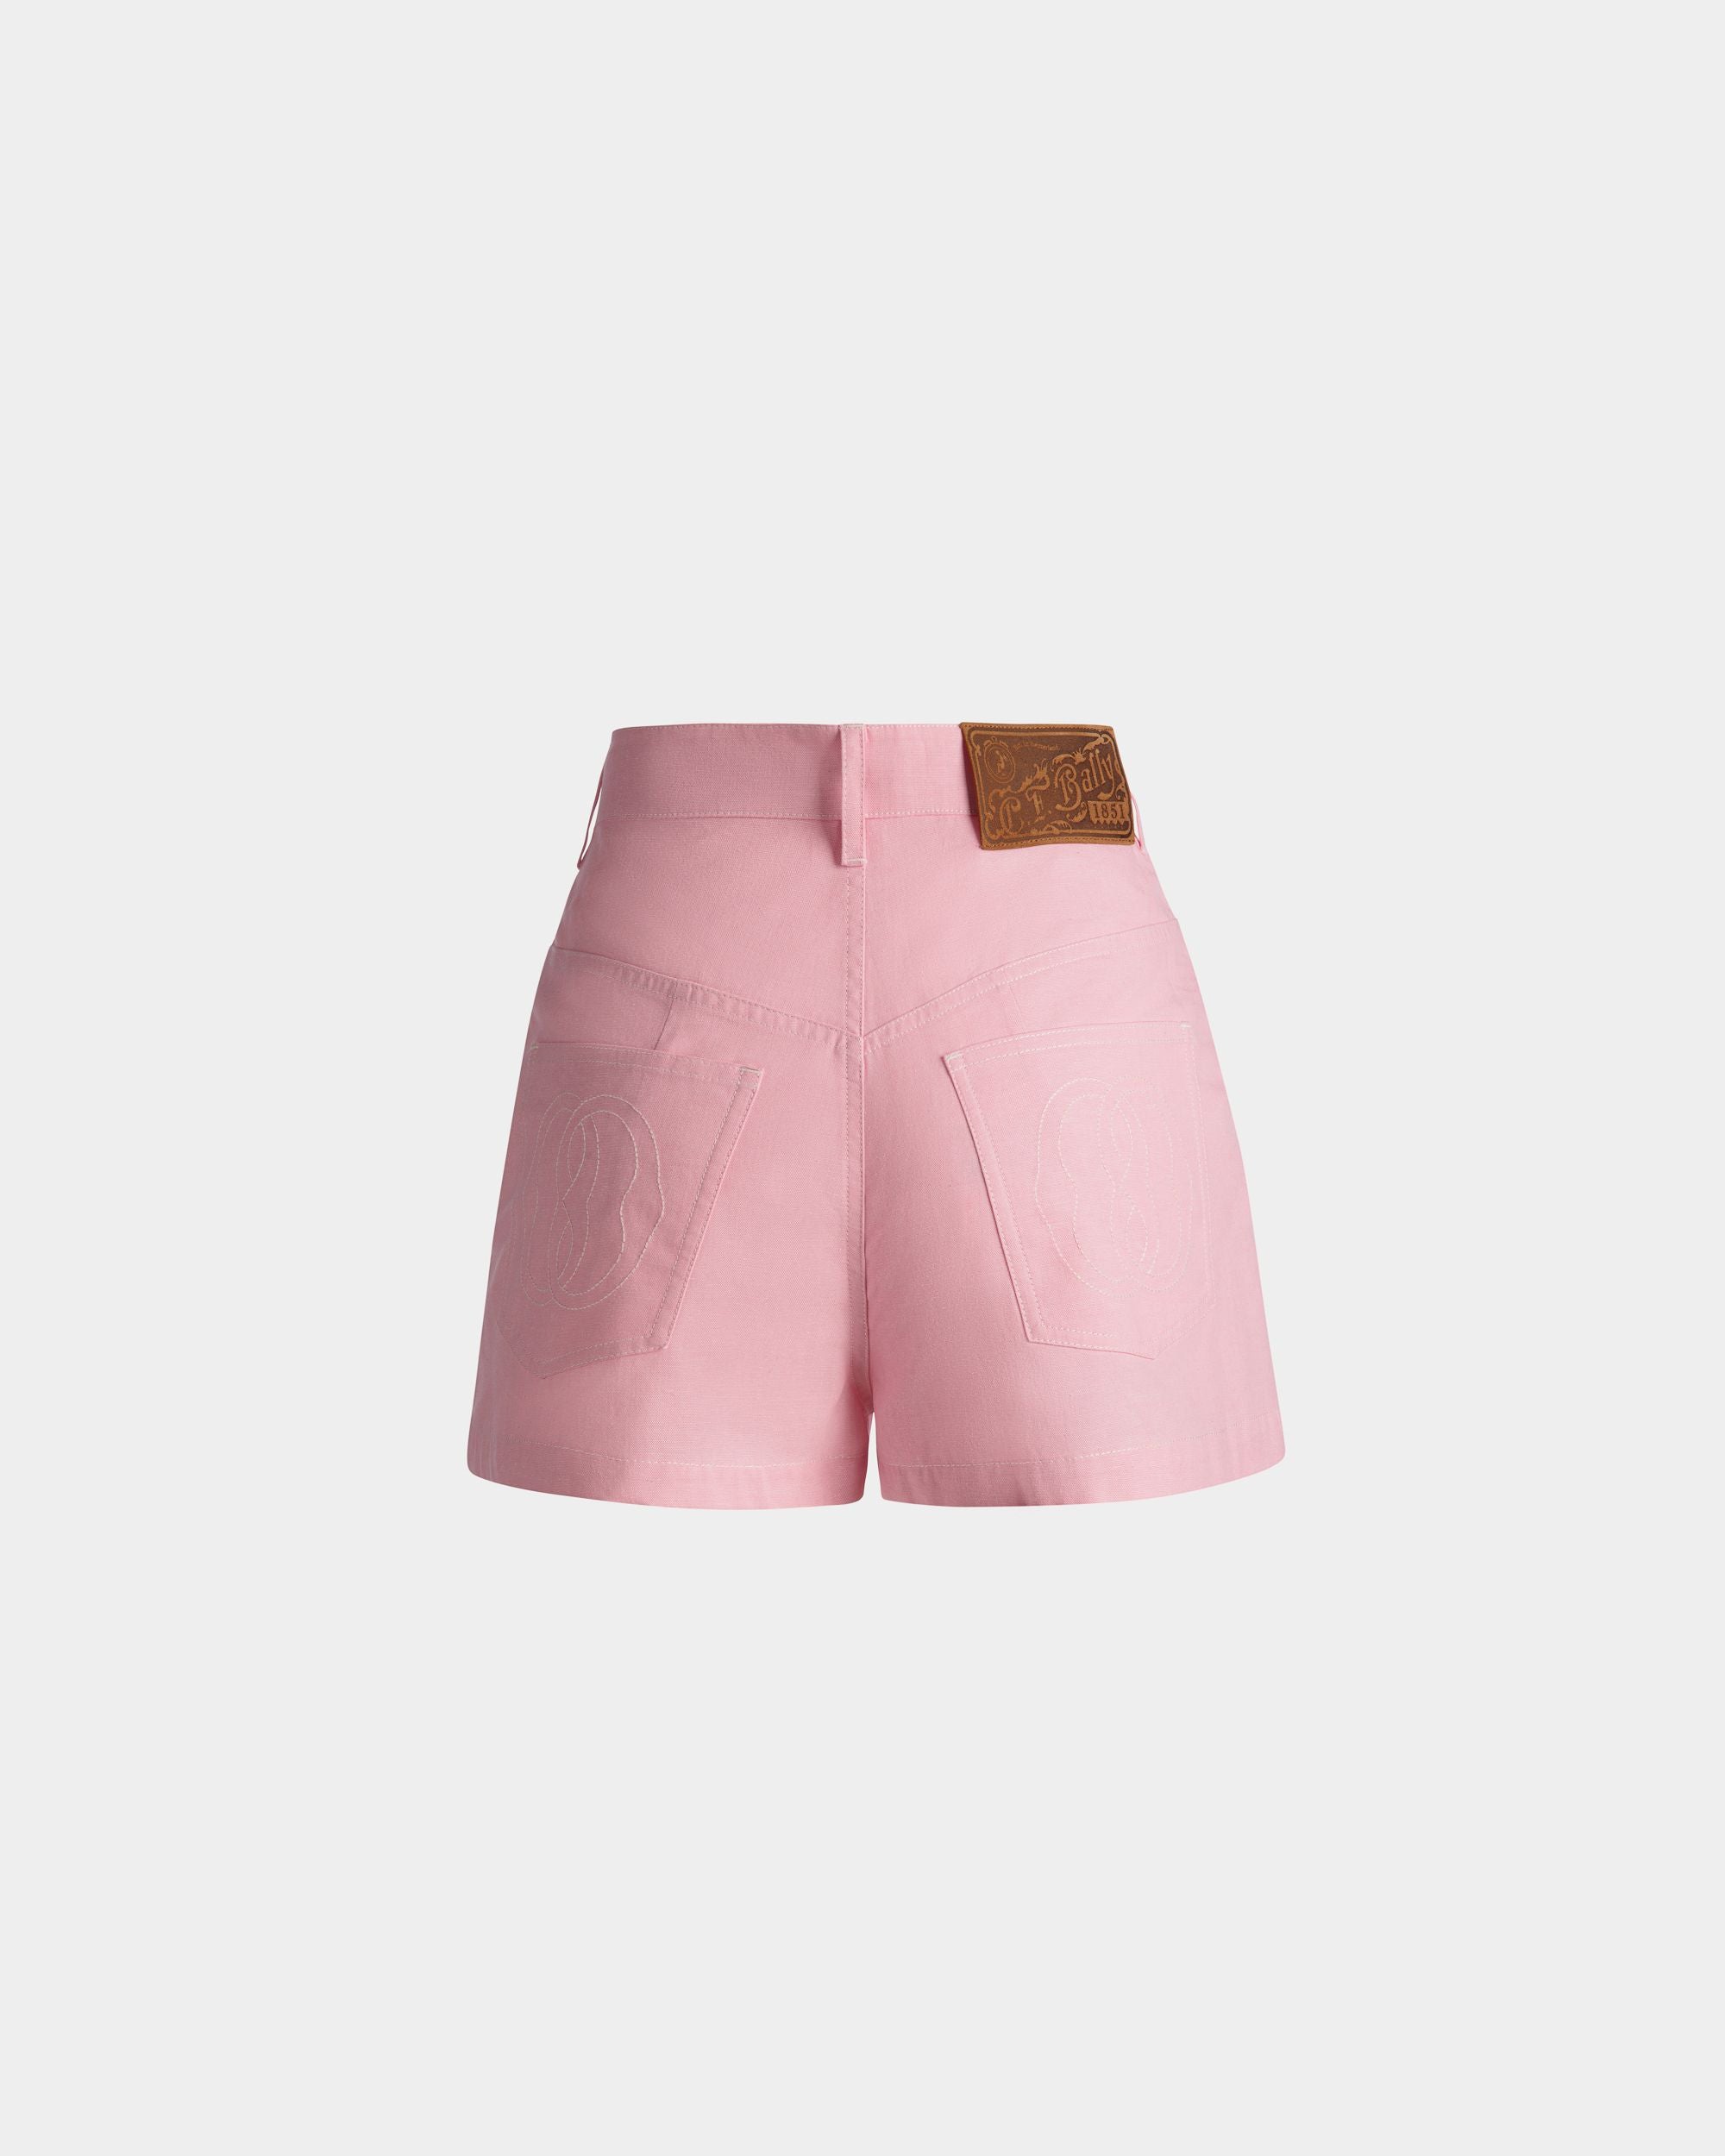 Women's Flared Stretch Pants in Light Pink